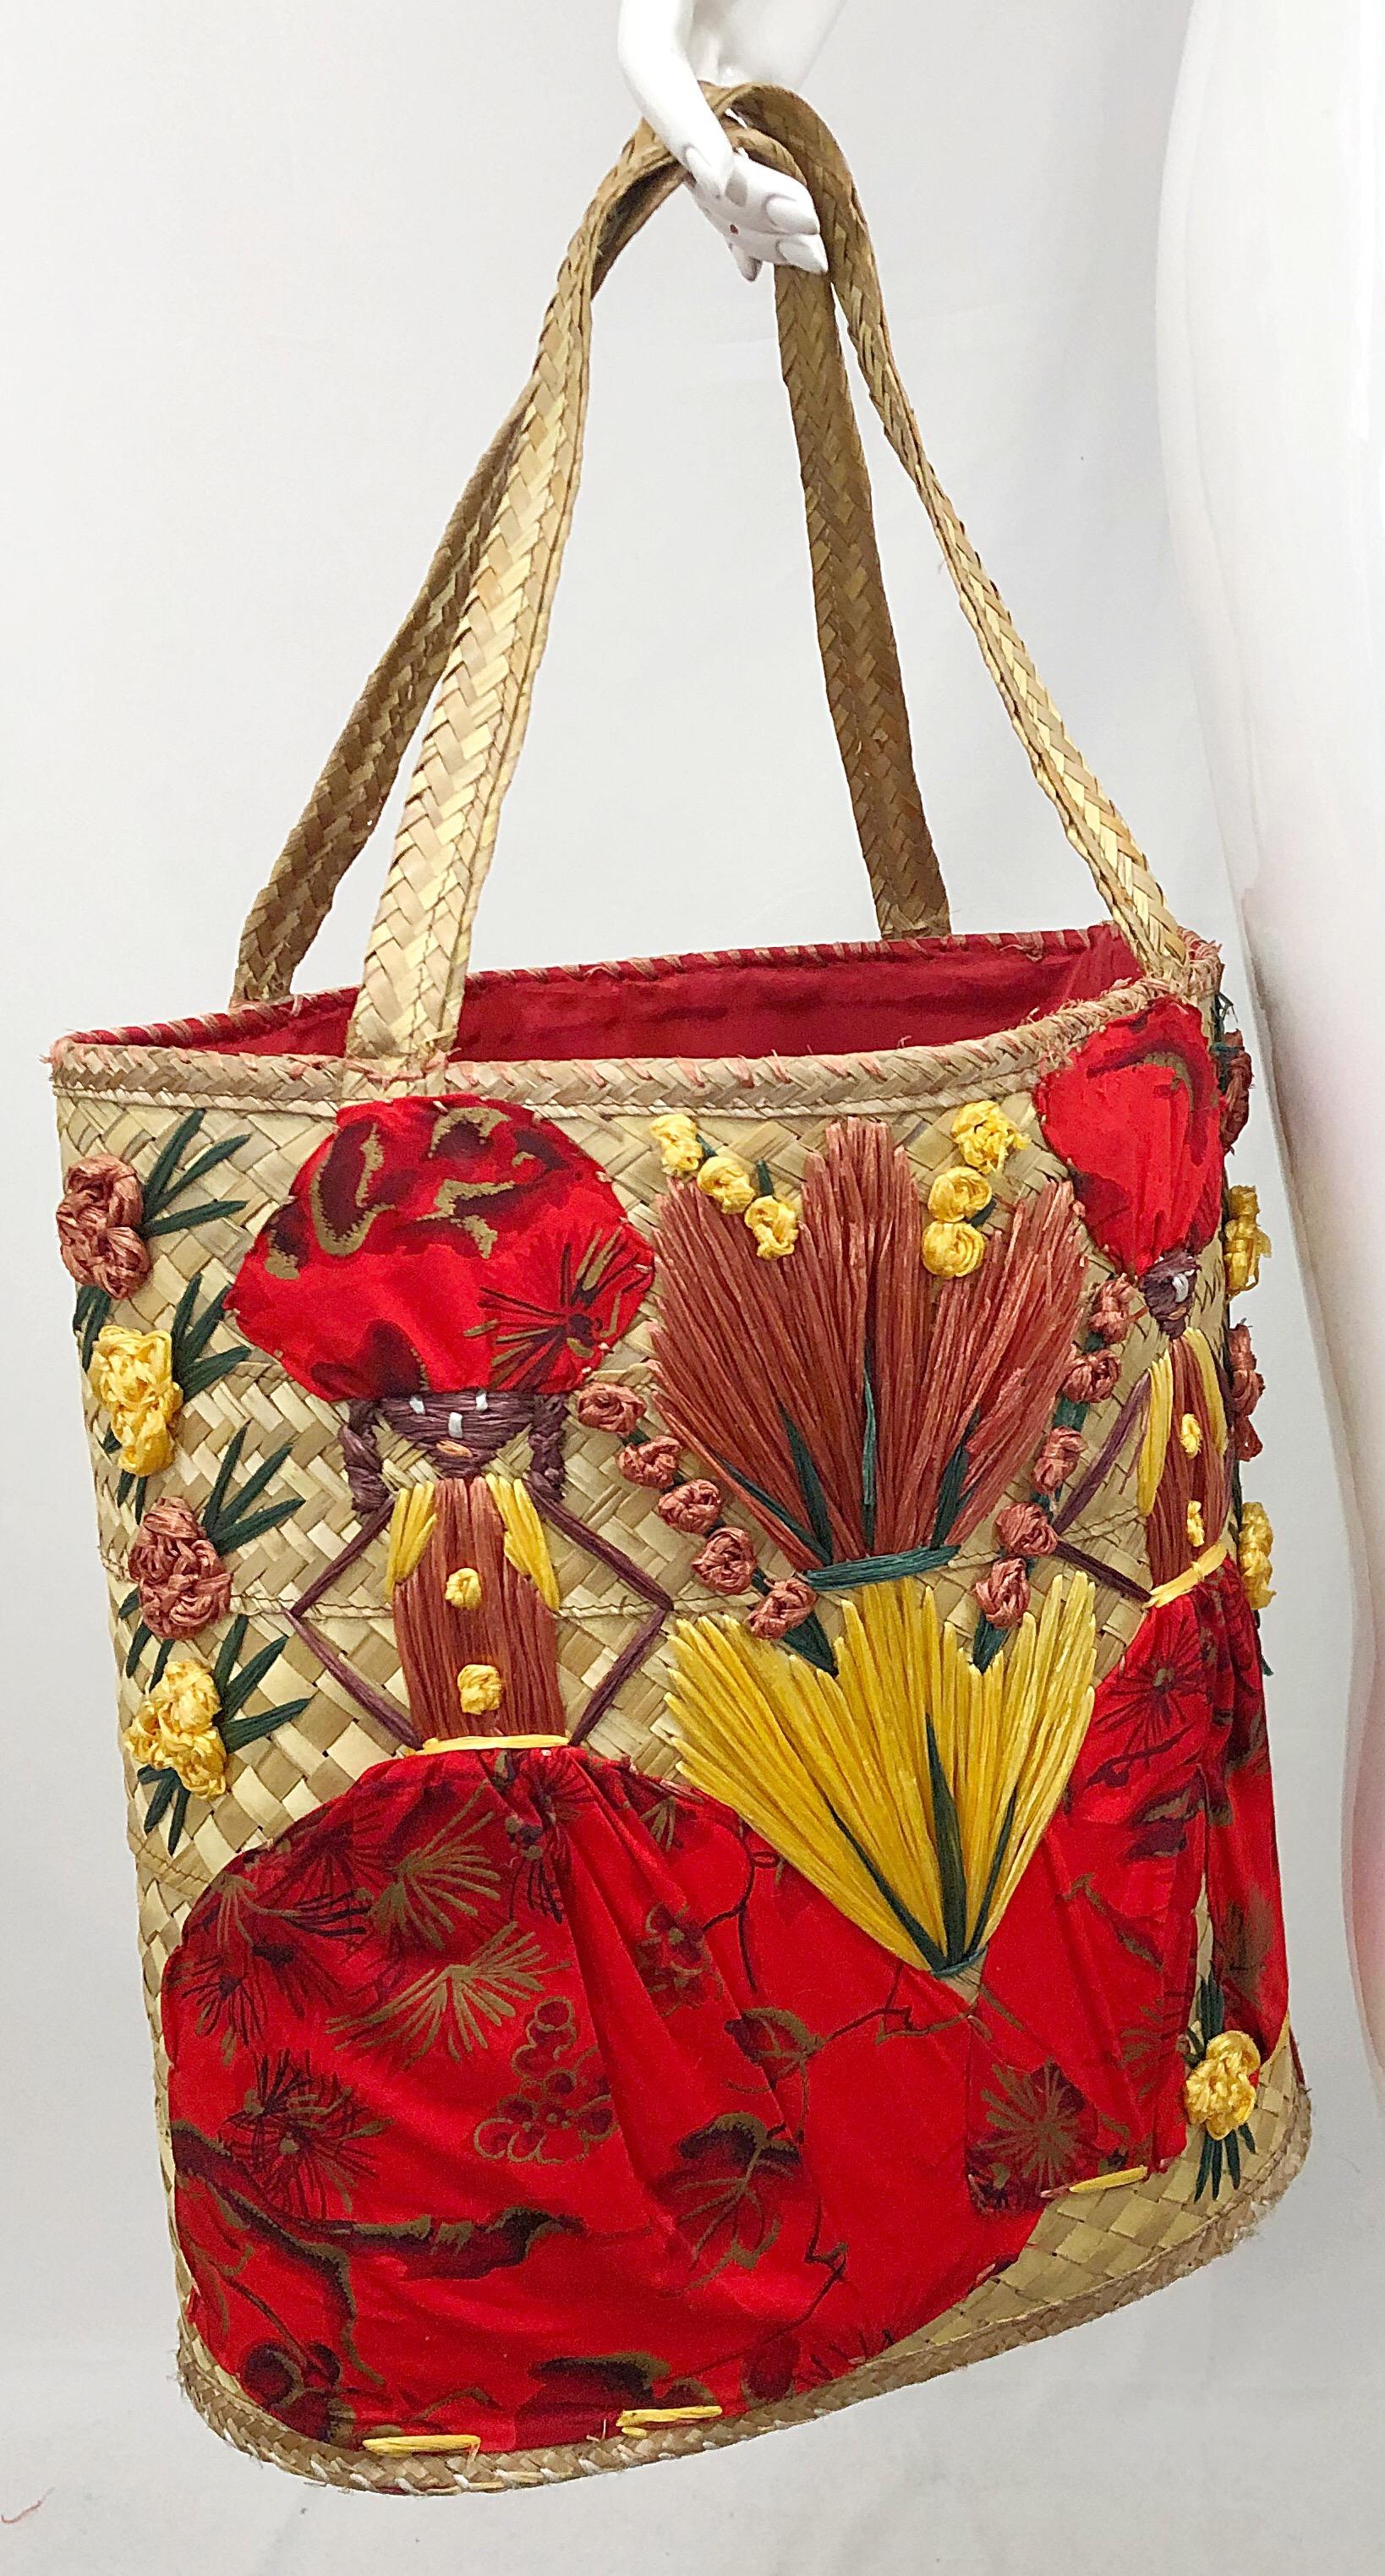 Amazing 1970s extra large novelty embroidered raffia tropical Hawaiian straw tote bag ! Features a vibrant red lining, which is a symbol of good luck with money. Can be worn on the shoulder or carried in hand. Vibrant colors of red, yellow, green,